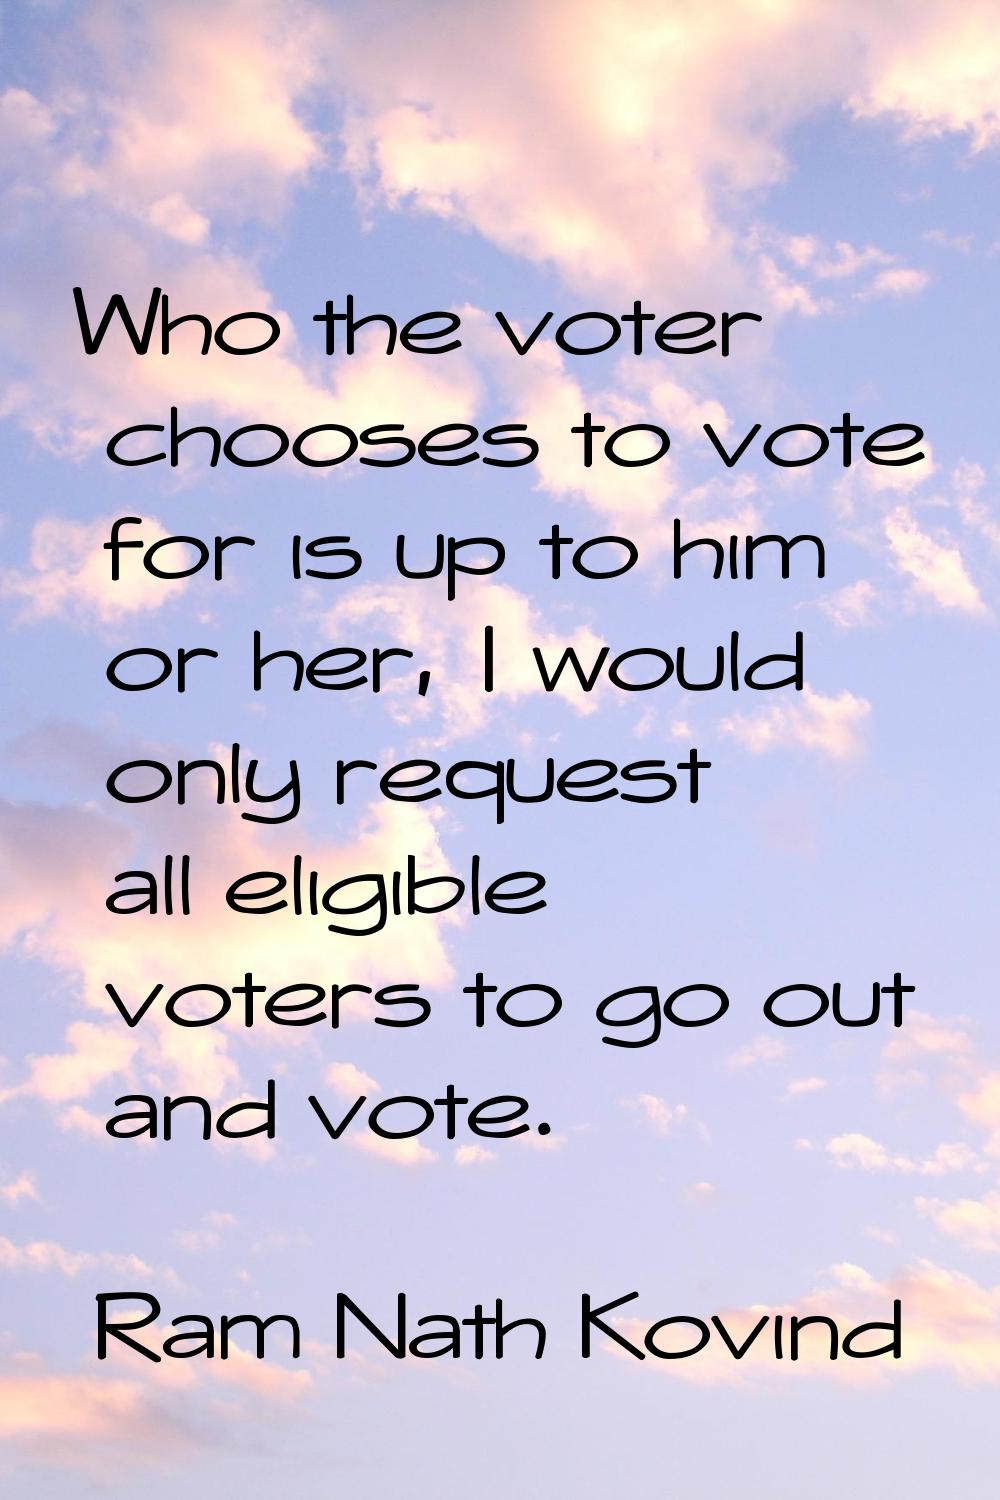 Who the voter chooses to vote for is up to him or her, I would only request all eligible voters to 